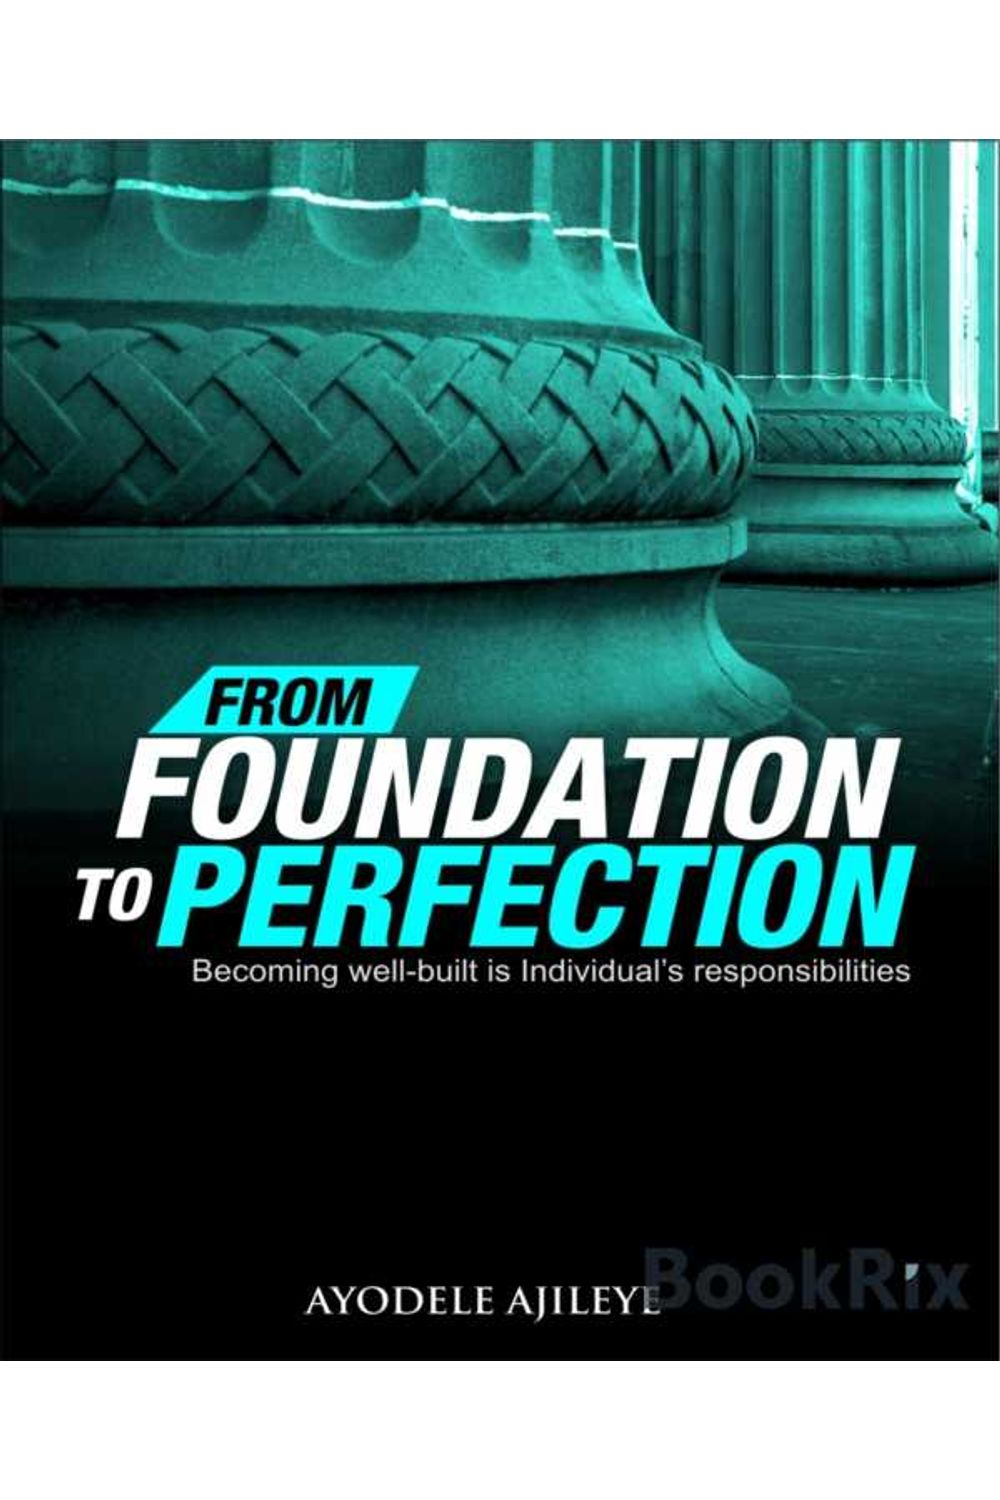 bw-from-foundation-to-perfection-bookrix-9783748724773